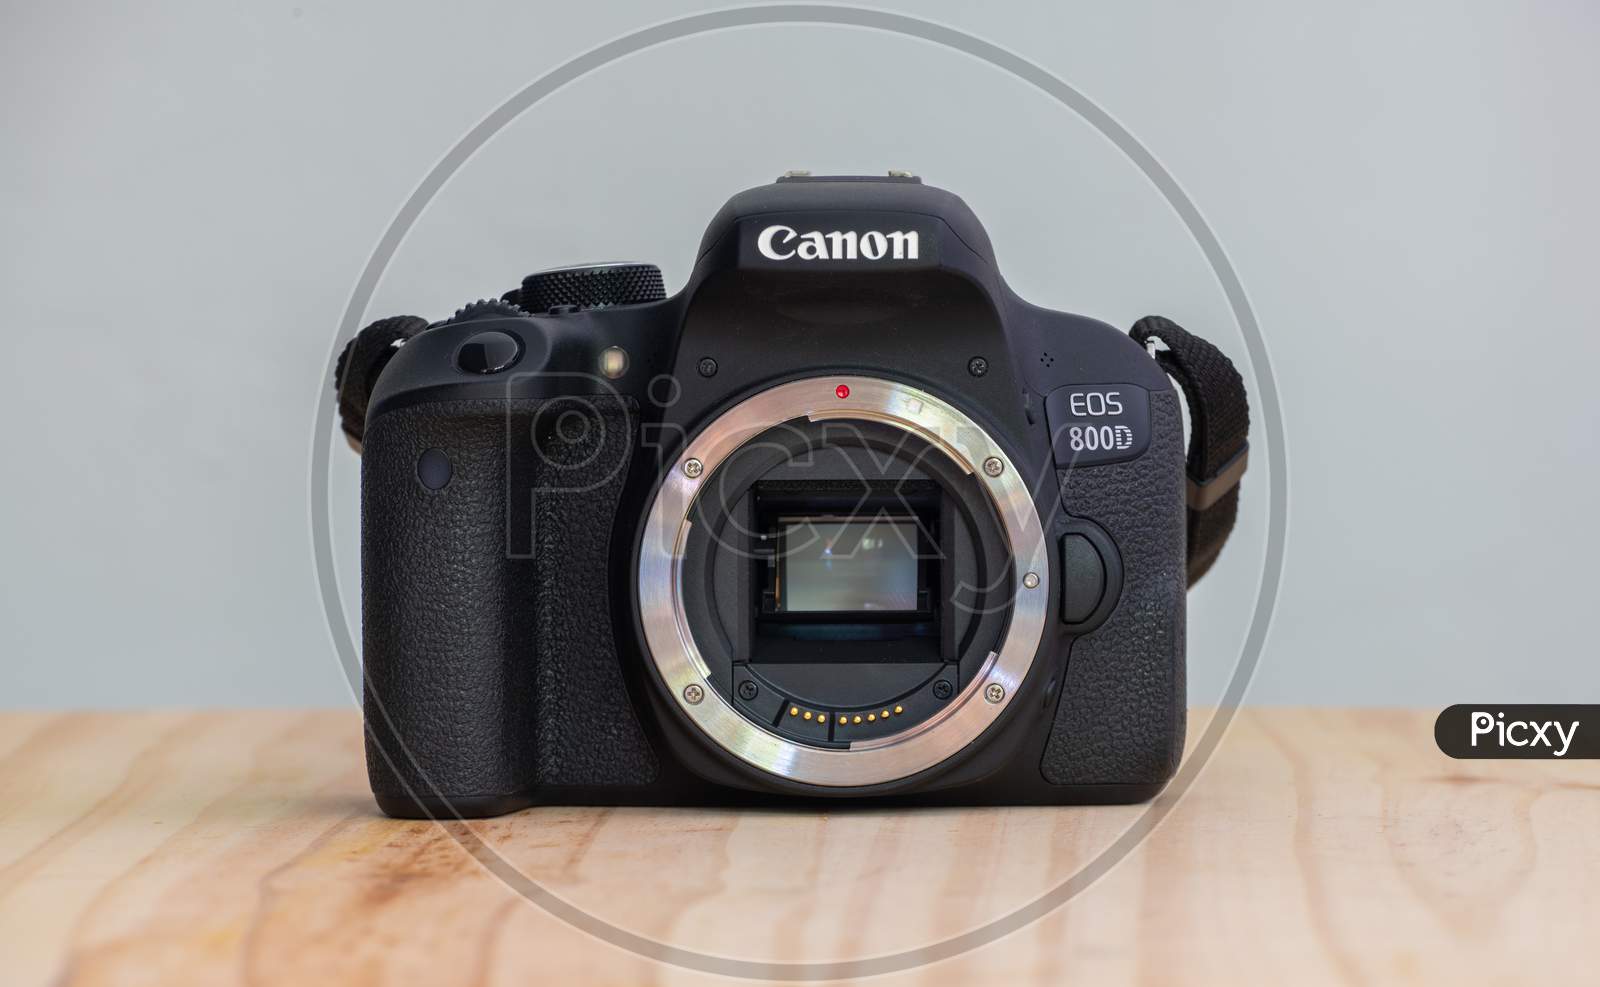 Galle, Sri Lanka - 02 18 2021: Canon Eos 800D Also Known As Rebel T7I Dslr Camera, Canon Ef Mount, And Cmos Sensor With Digic 7 Processor Powering The Dslr, Front View Without Body Cap.